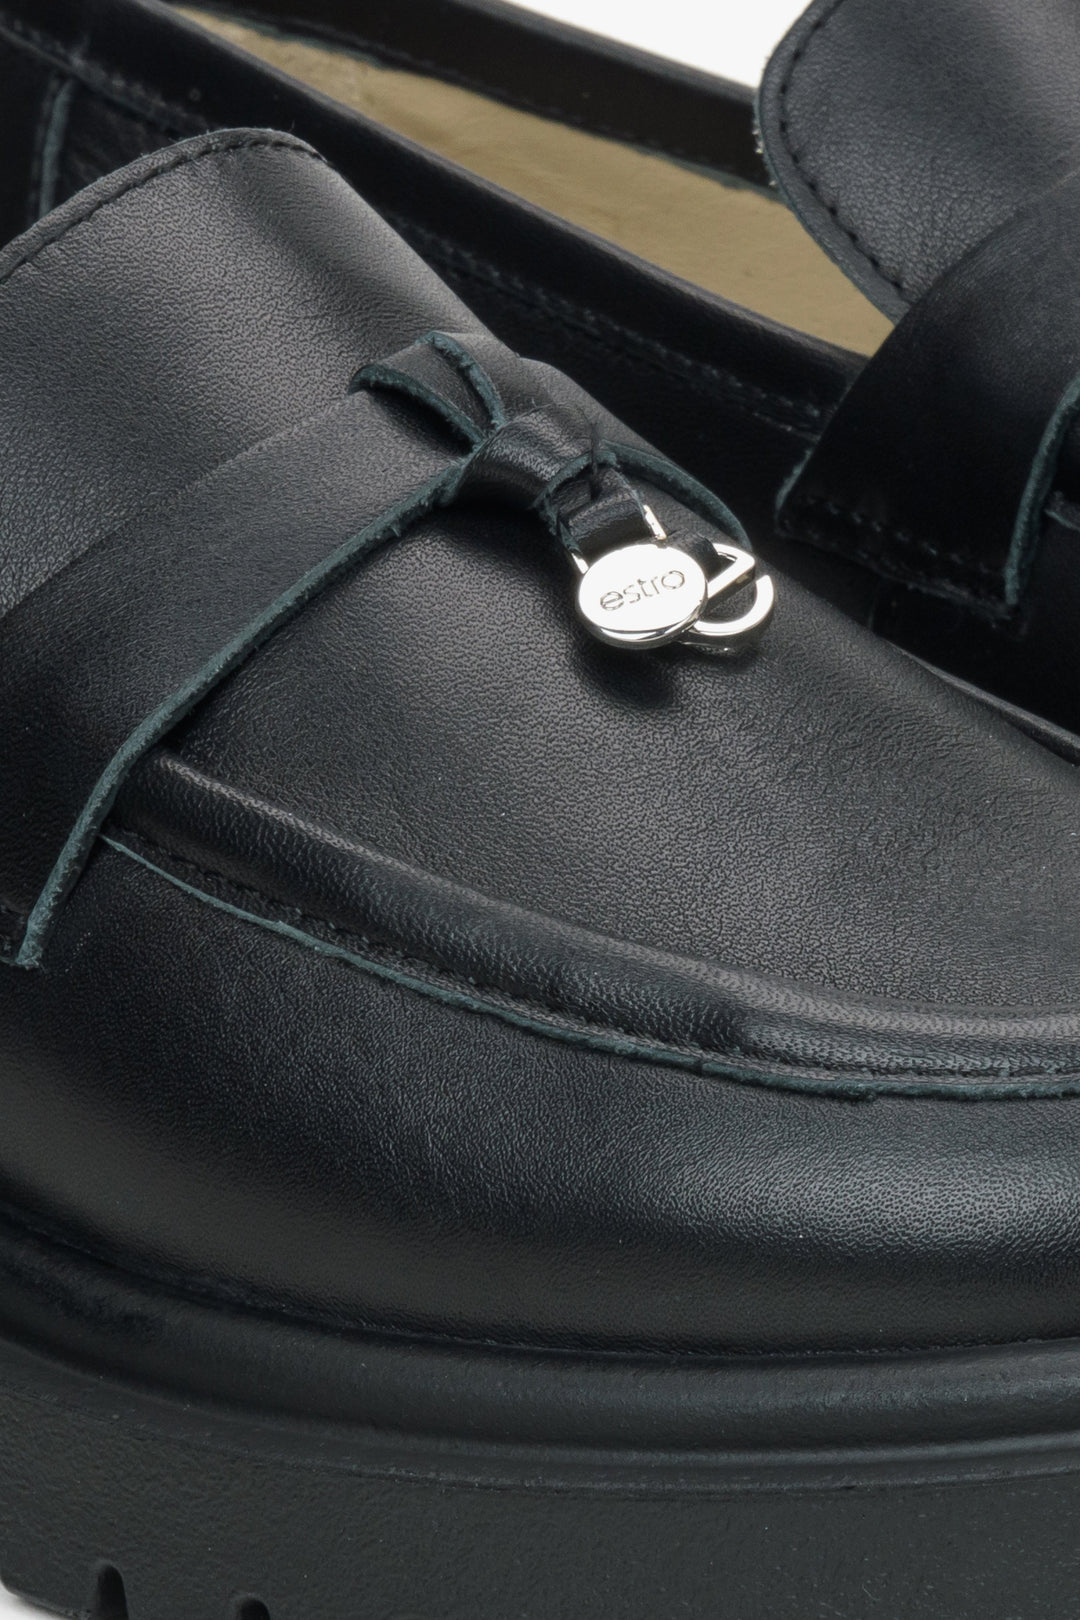 Estro women's leather loafers - close-up on details.